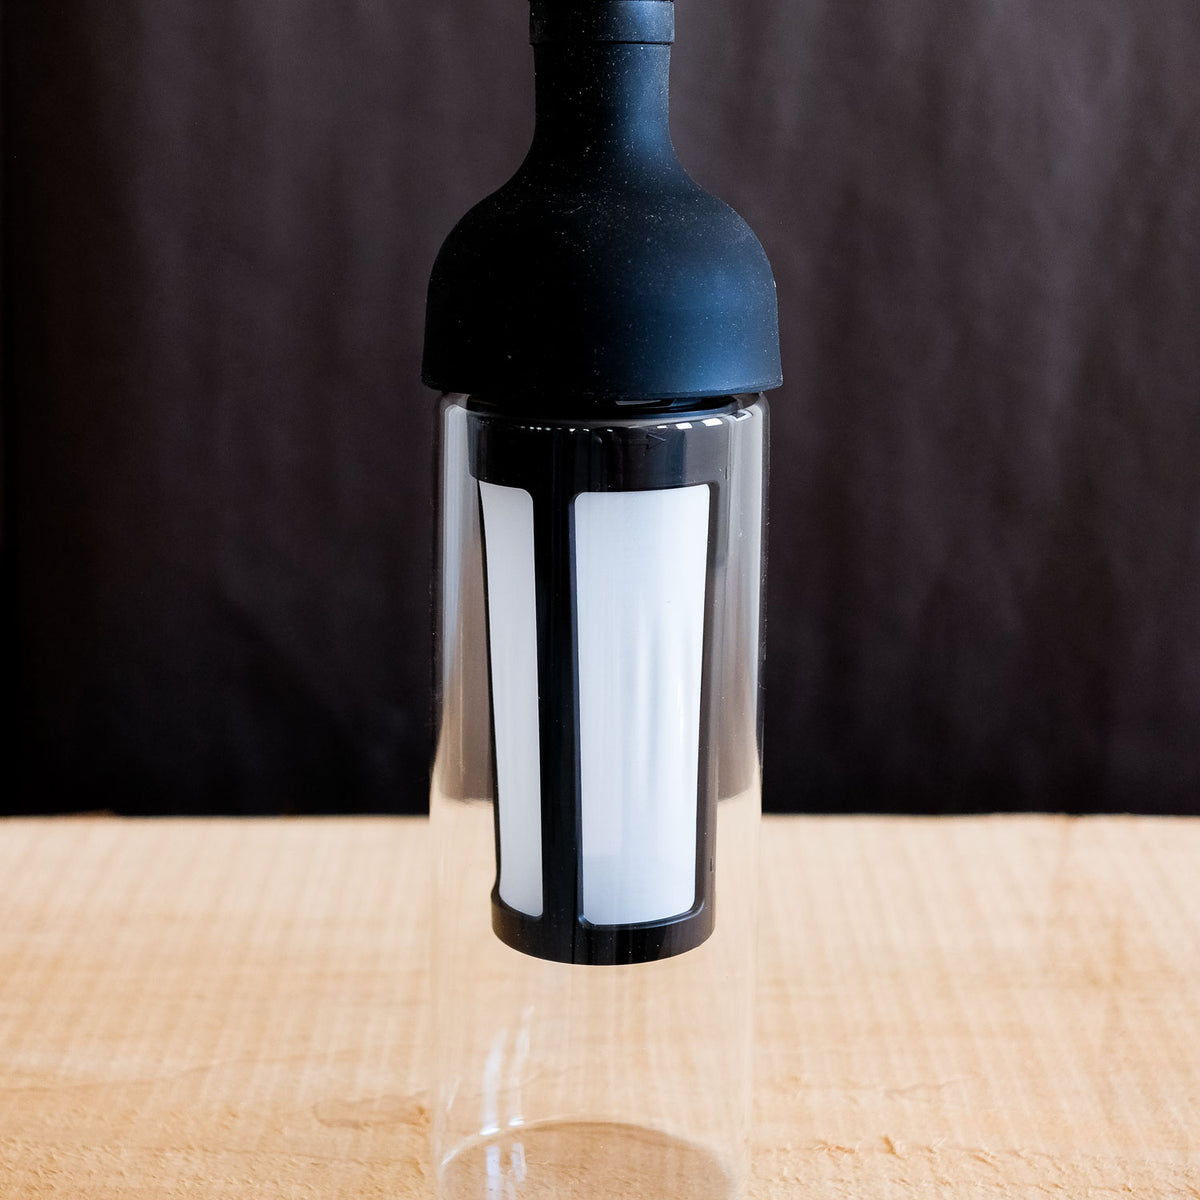 Hario Cold Brew Coffee Filter in Bottle — CLO Coffee